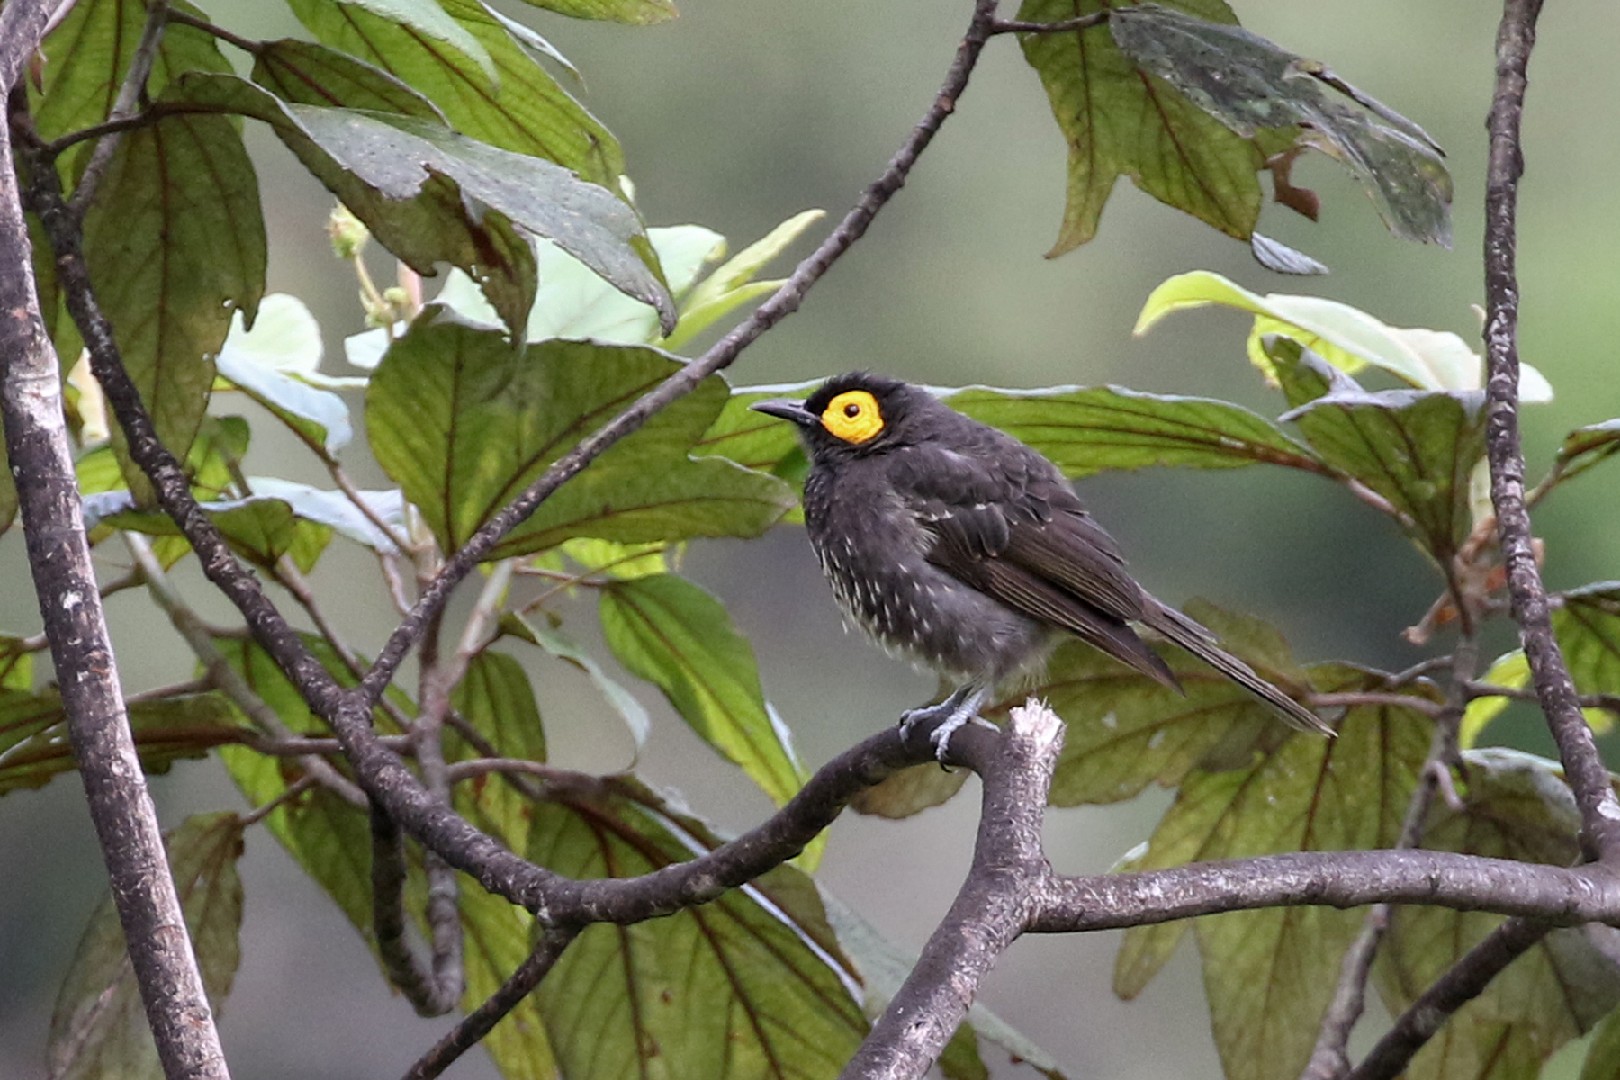 Smoky honeyeaters and allies (Melipotes)